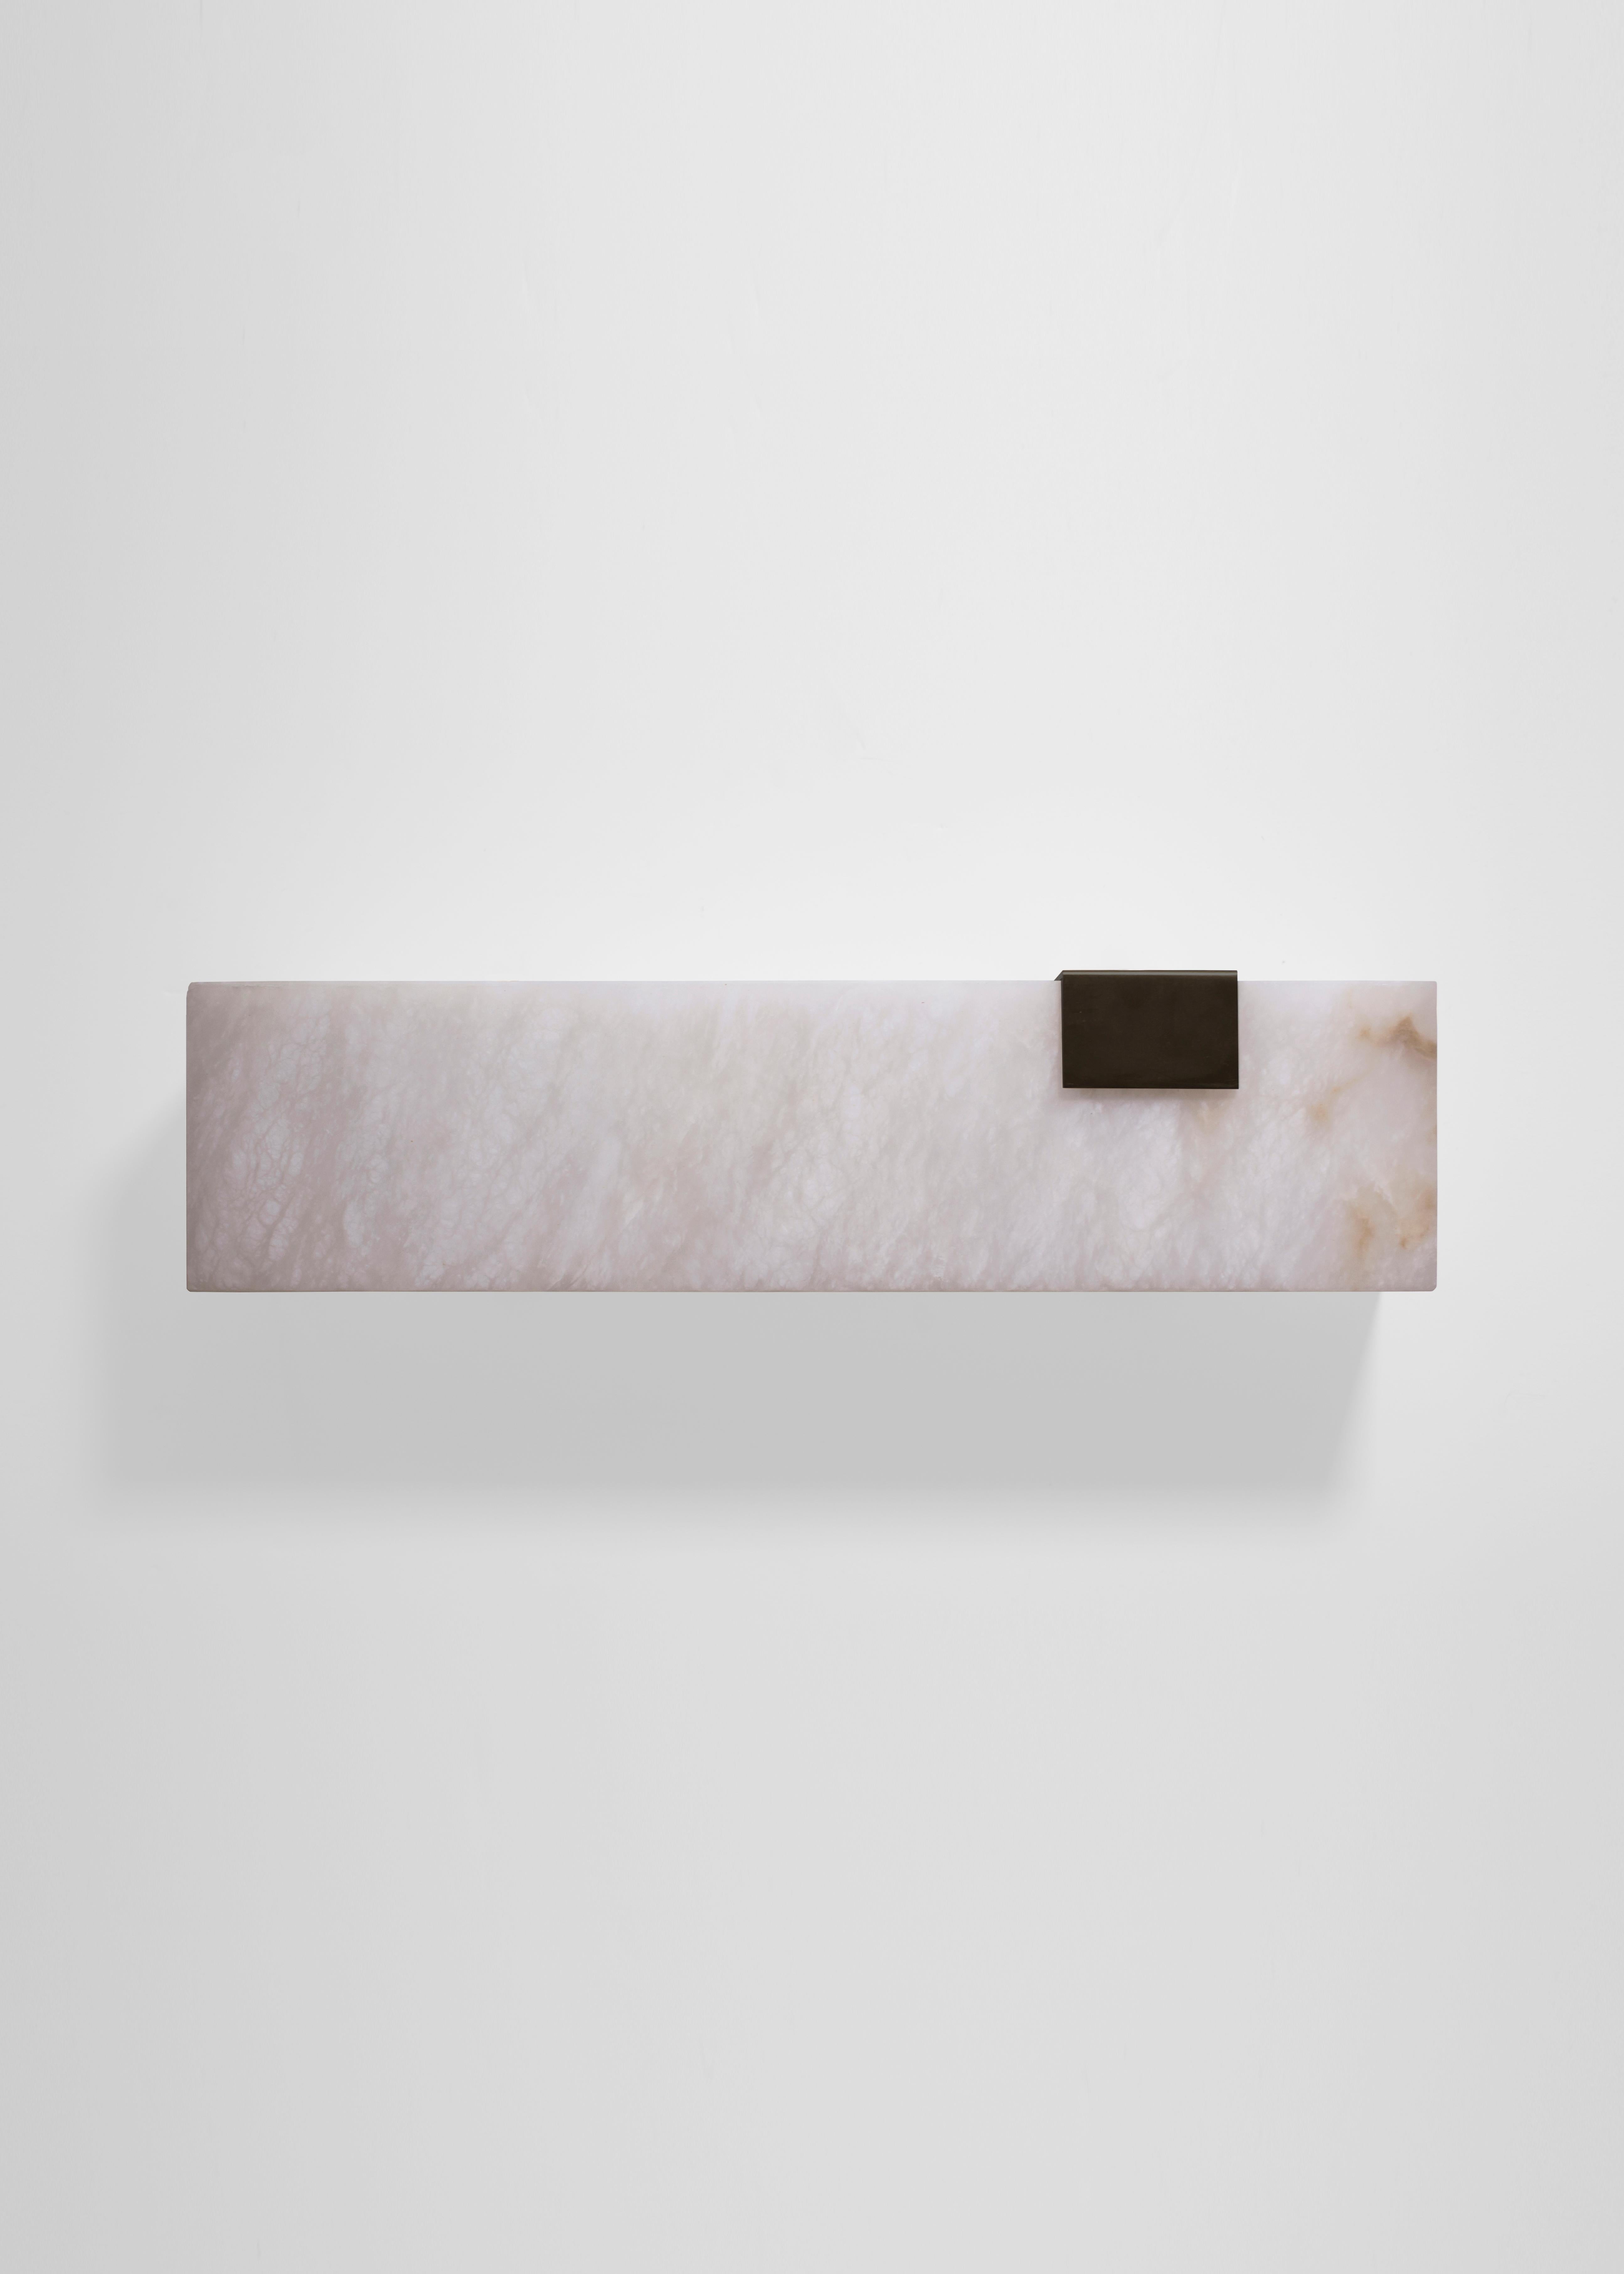 Orphan Work 003-1C Sconce, 2018
Shown in blackened brass and alabaster 
Available in brushed brass, brushed nickel and blackened brass
Measures: 5 1/4”H x 19”W x 3 7/8”D
Wall or ceiling mount
Vertical or horizontal
Plug-in by request
1-4 adjustable